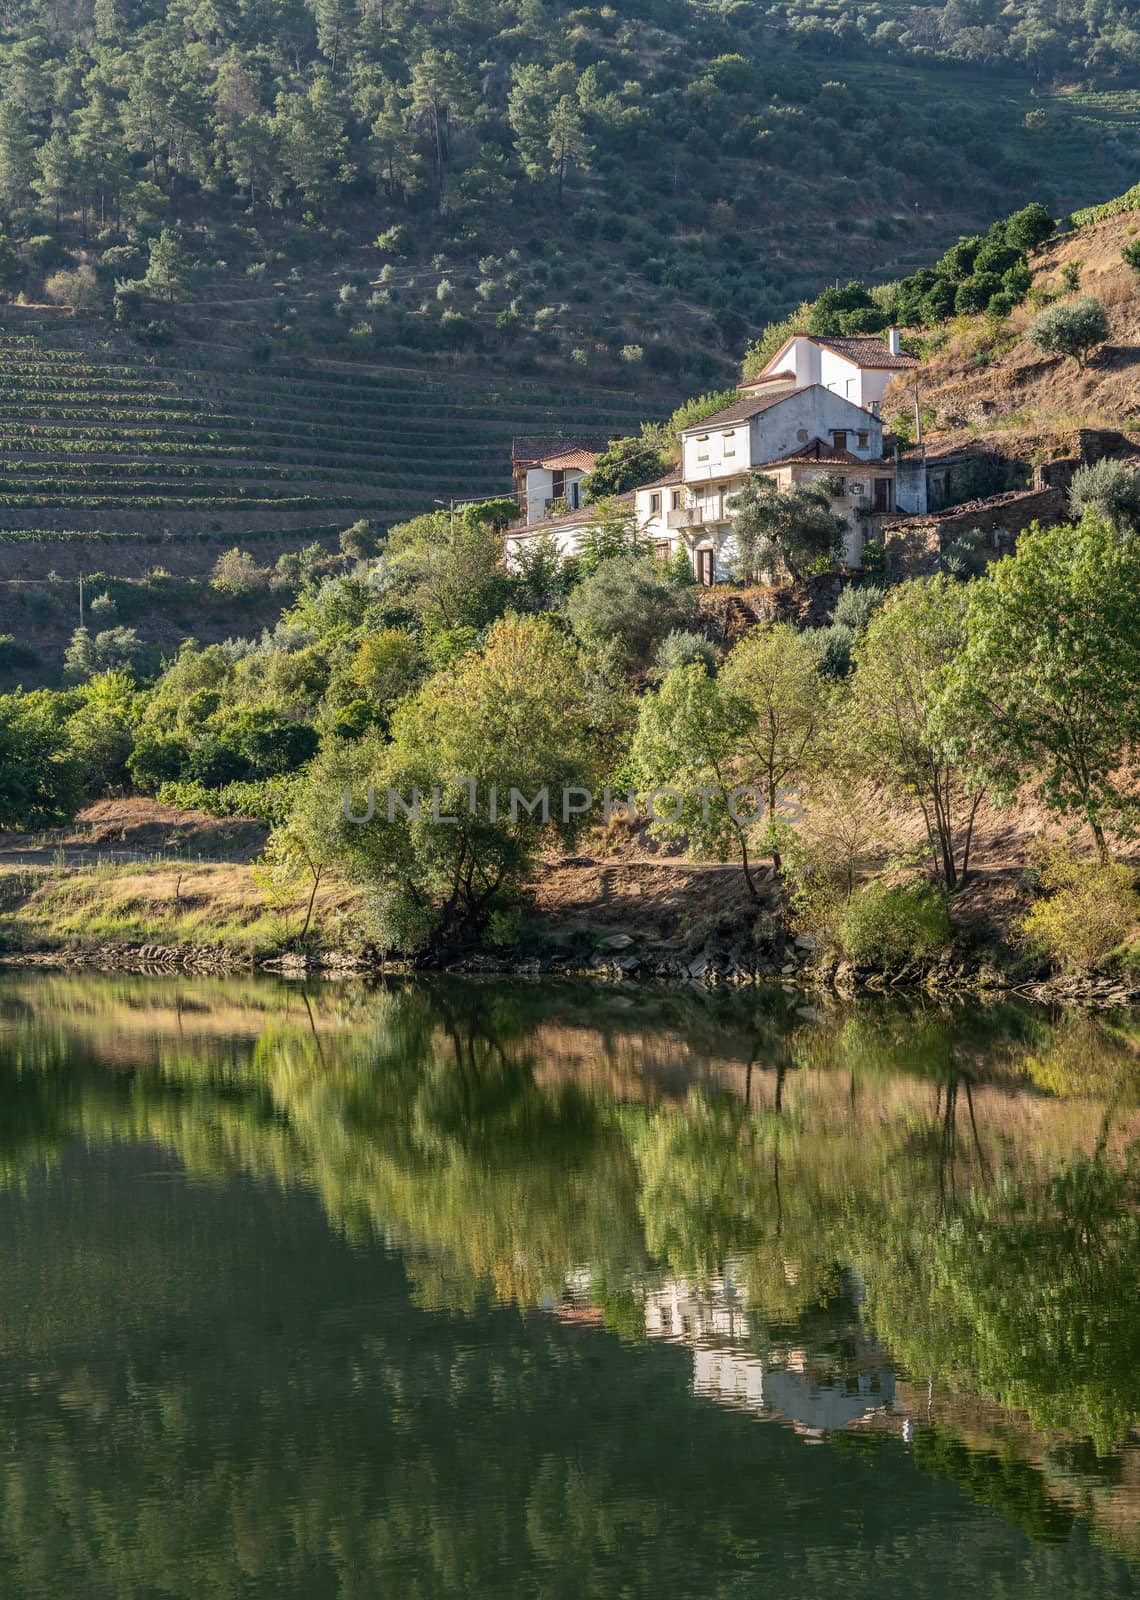 Whitewashed old Quinta or vineyard building on the banks of the River Douro in Portugal near Pinhao